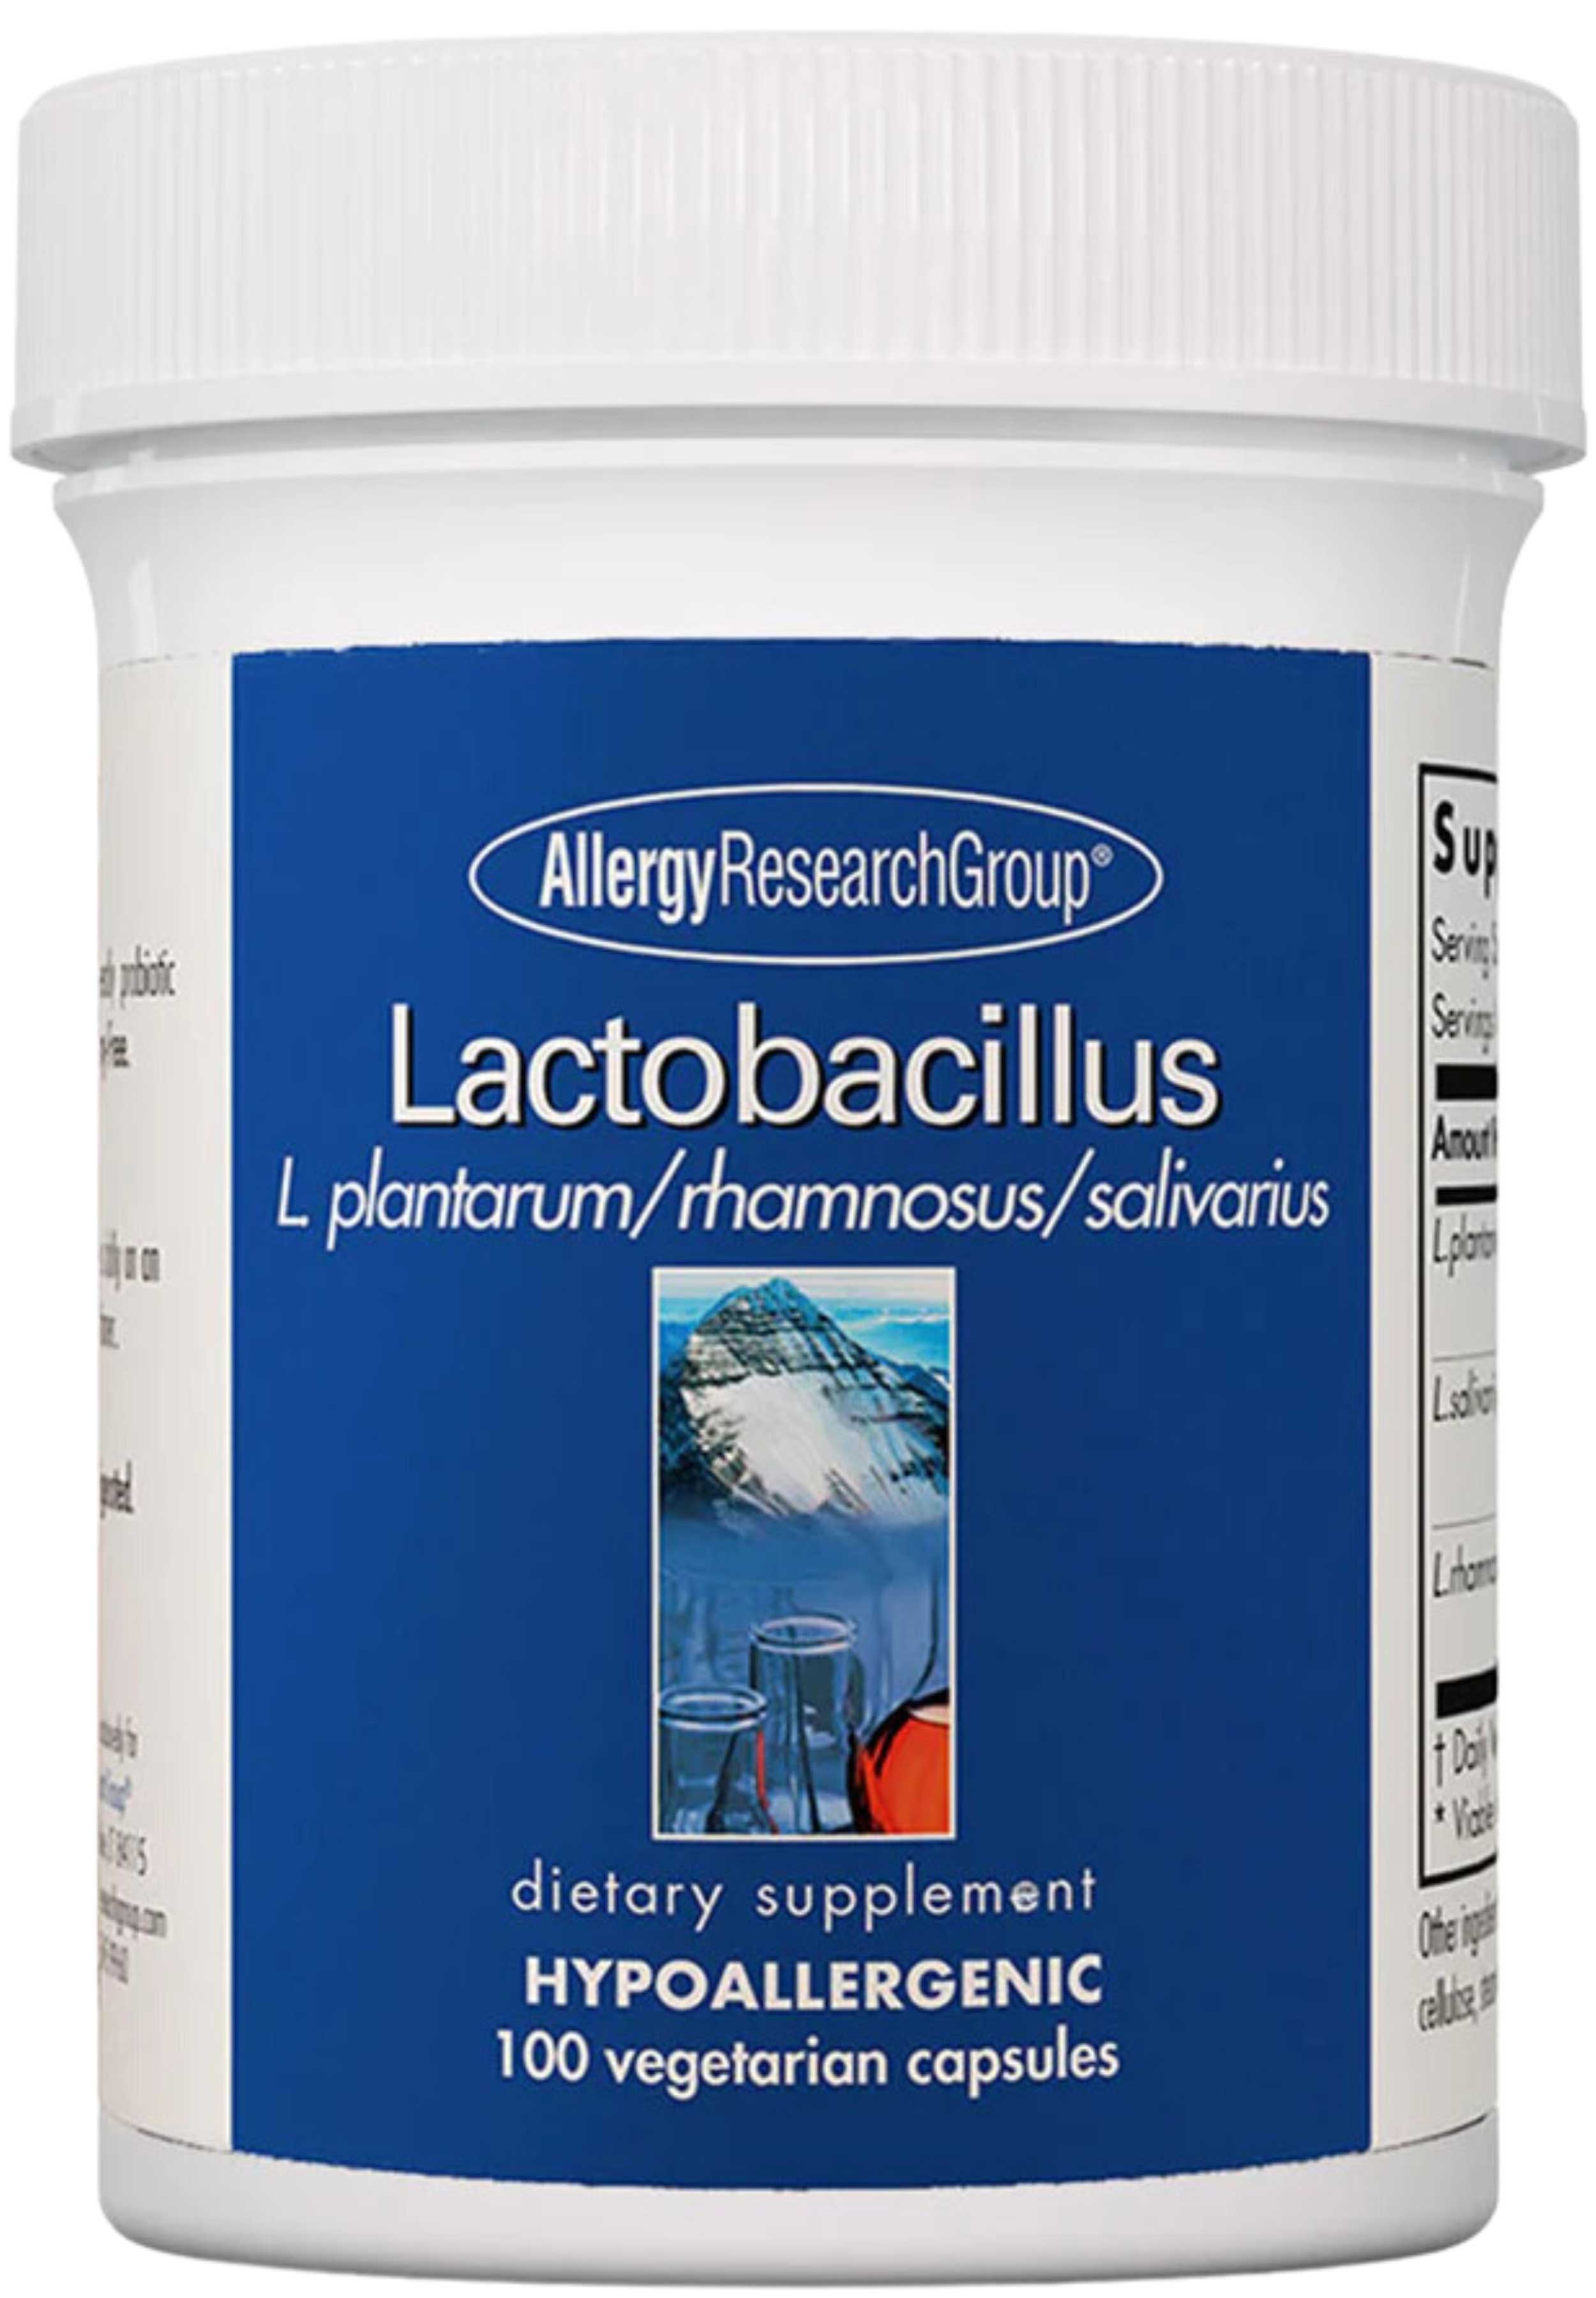 Allergy Research Group Lactobacillus